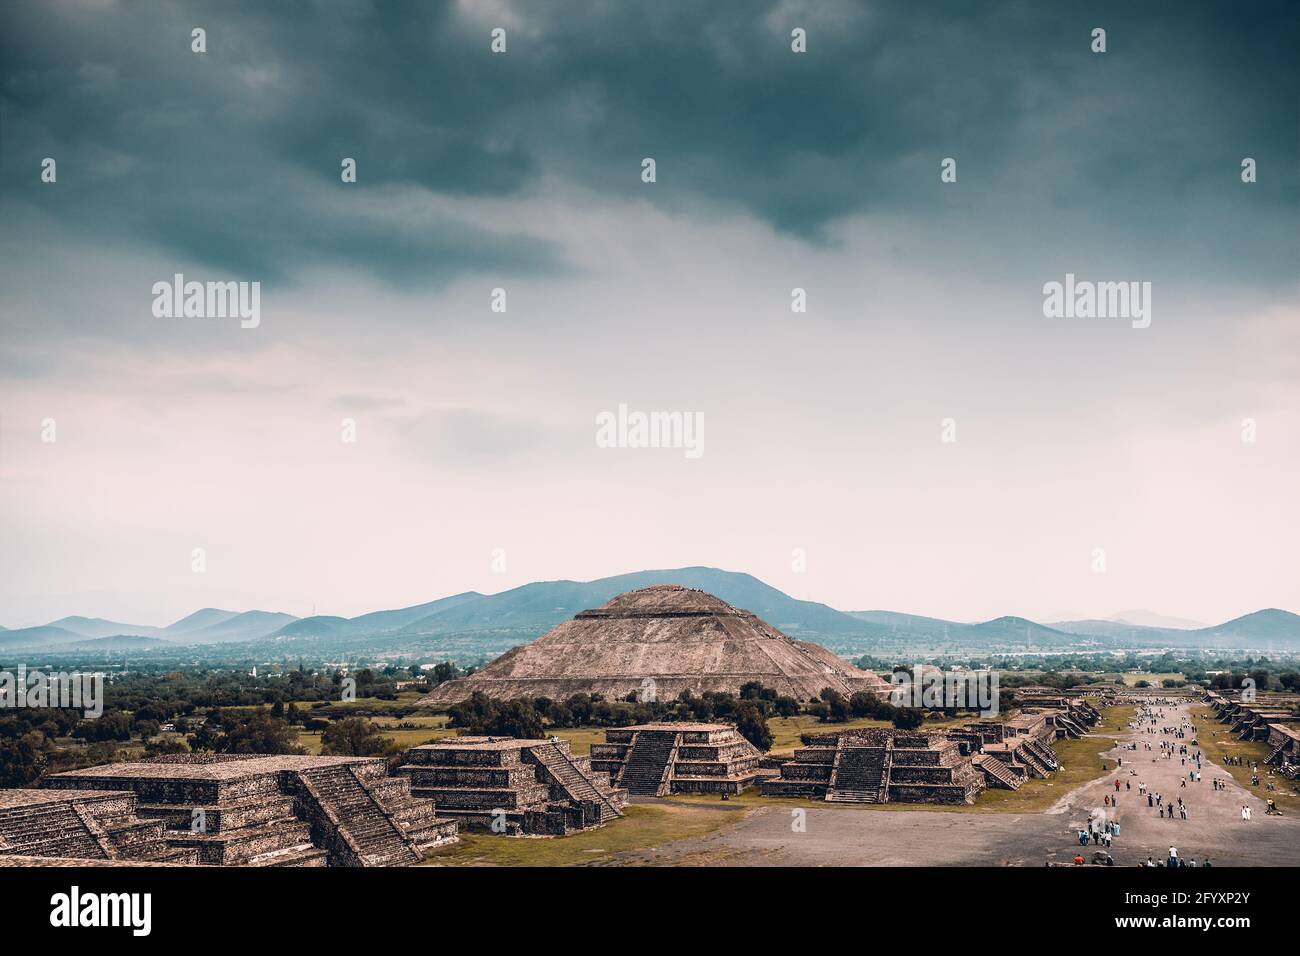 Beautiful Scene of an Ancient Ruins of Maya Pyramids. Pyramids of the Sun and the Moon. Old Aztec Civilization. Touristic Place. Teotihuacan. Mexico. Stock Photo